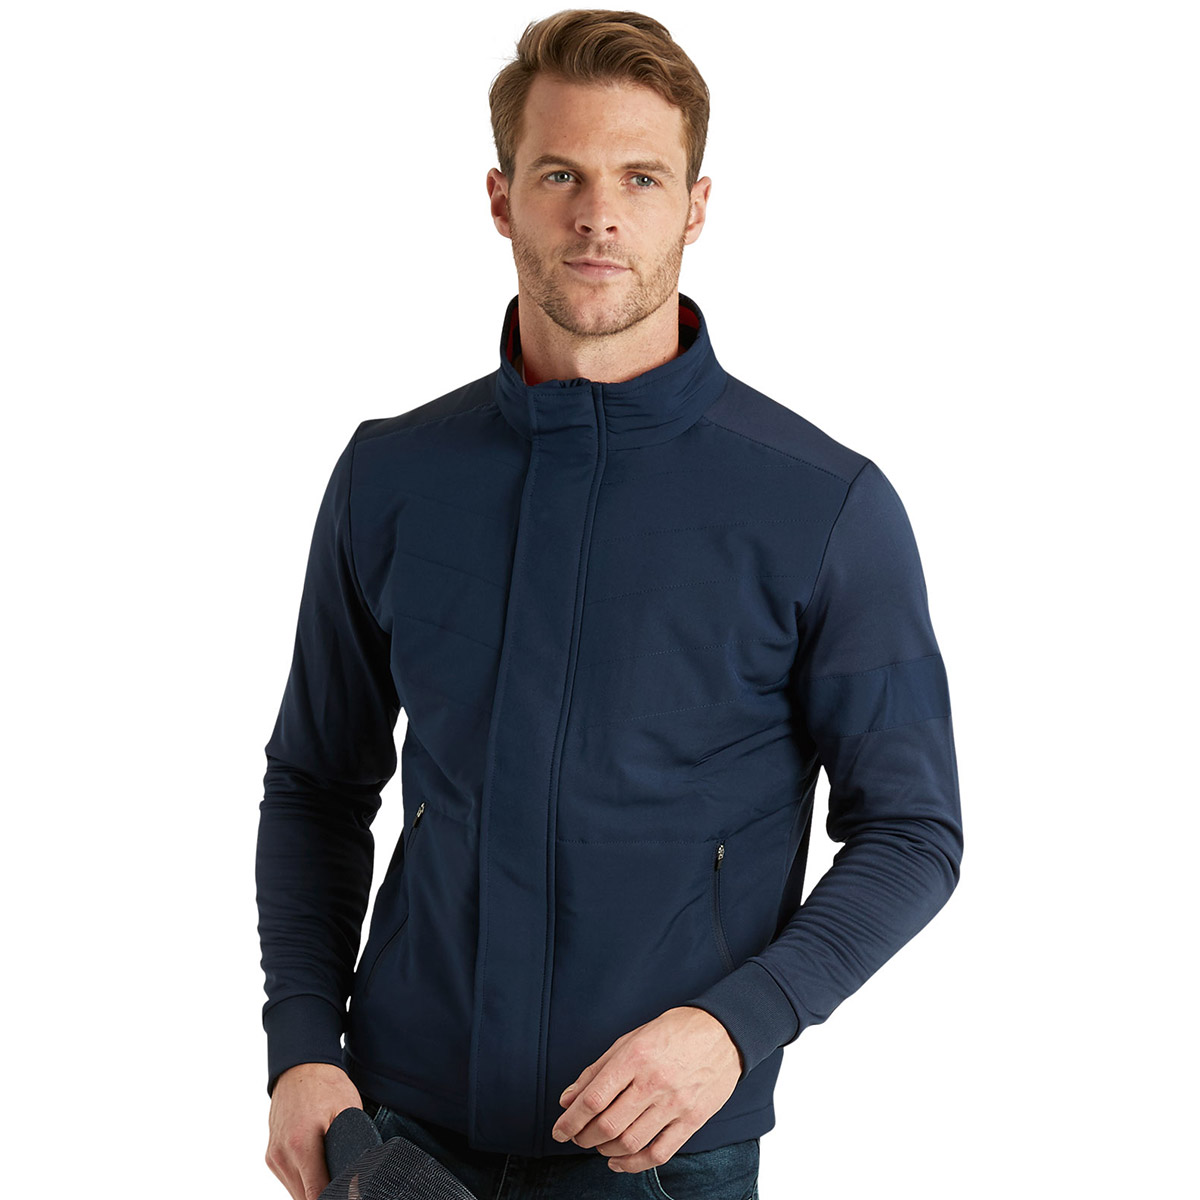 Bunker Mentality Norton Jacket from american golf